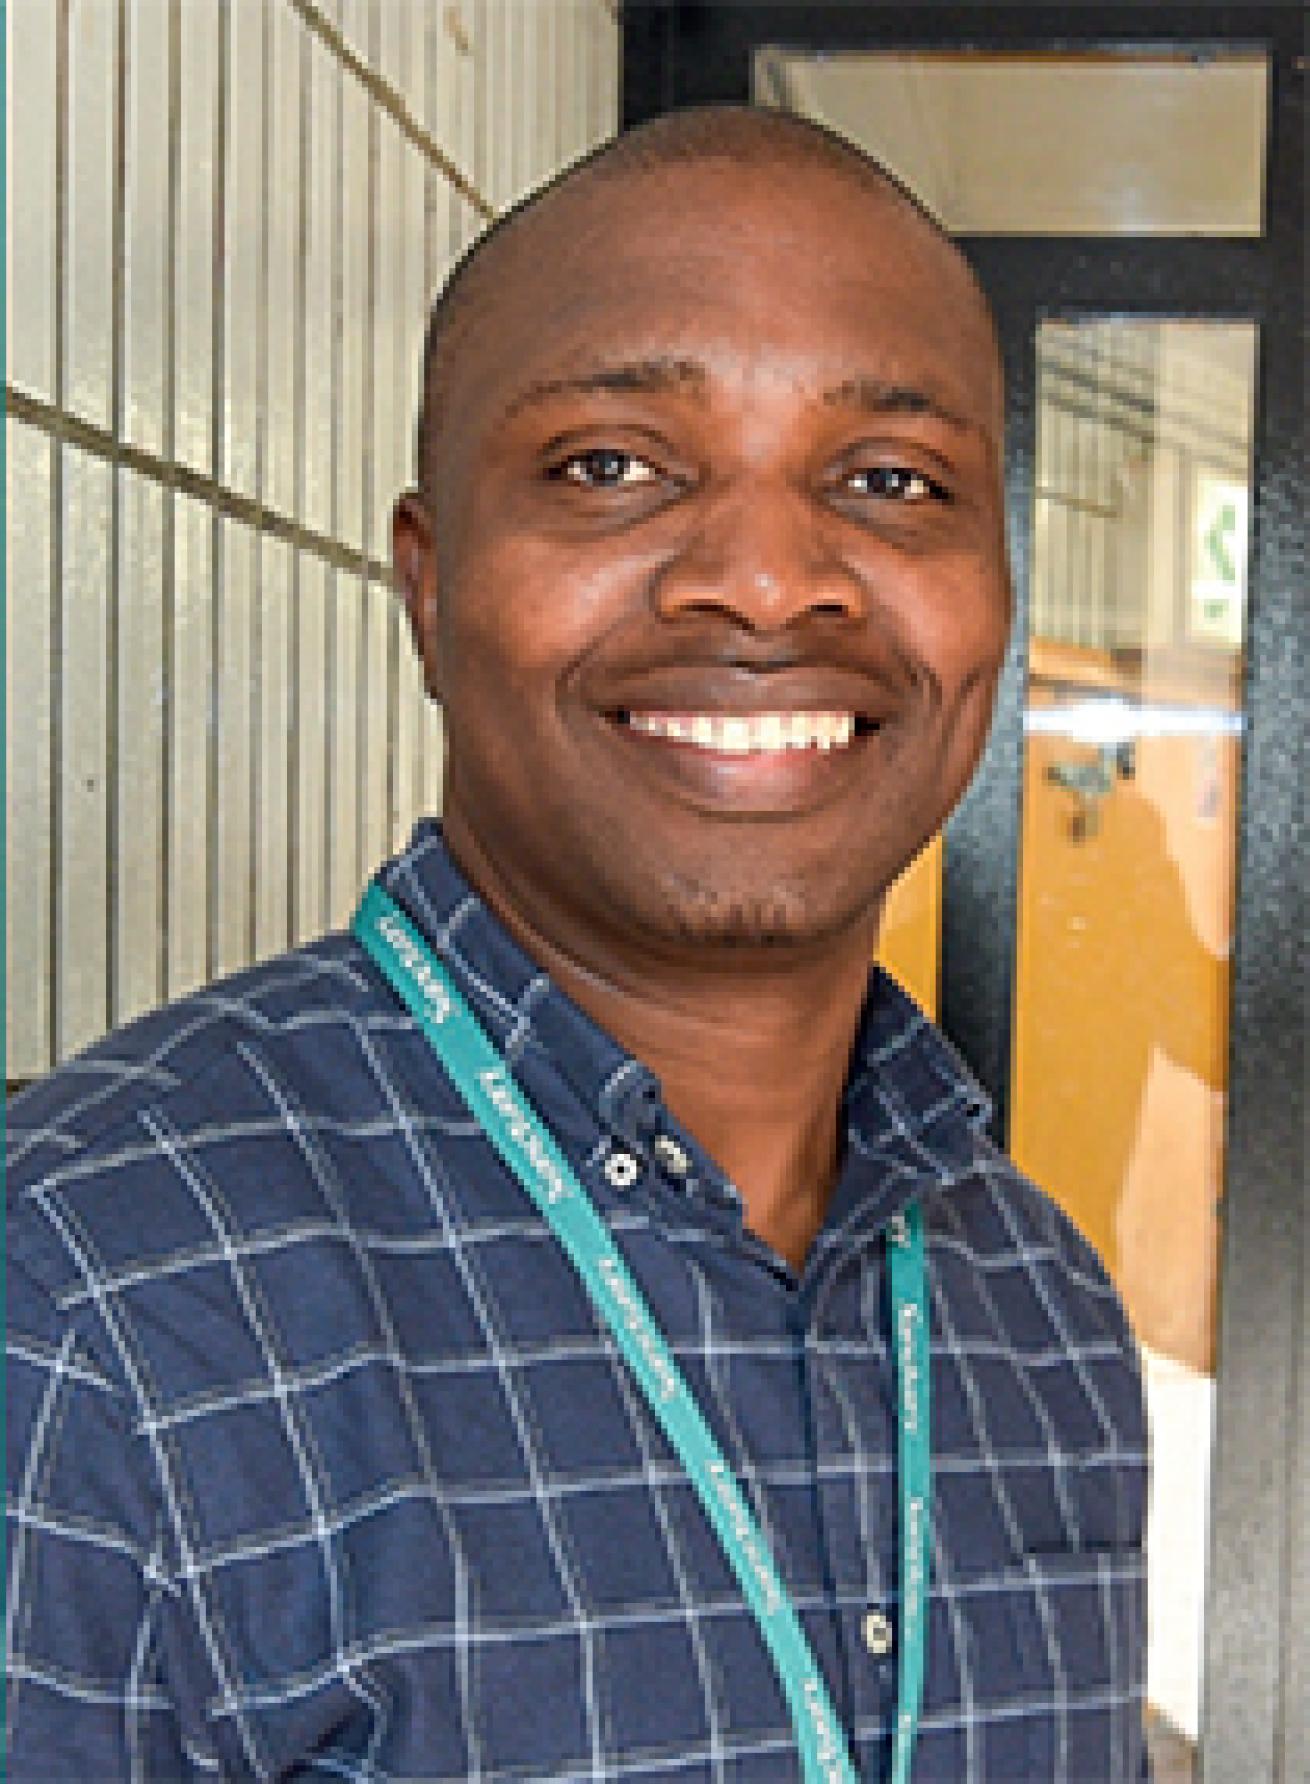 Building Safety Manager Patrick Achief